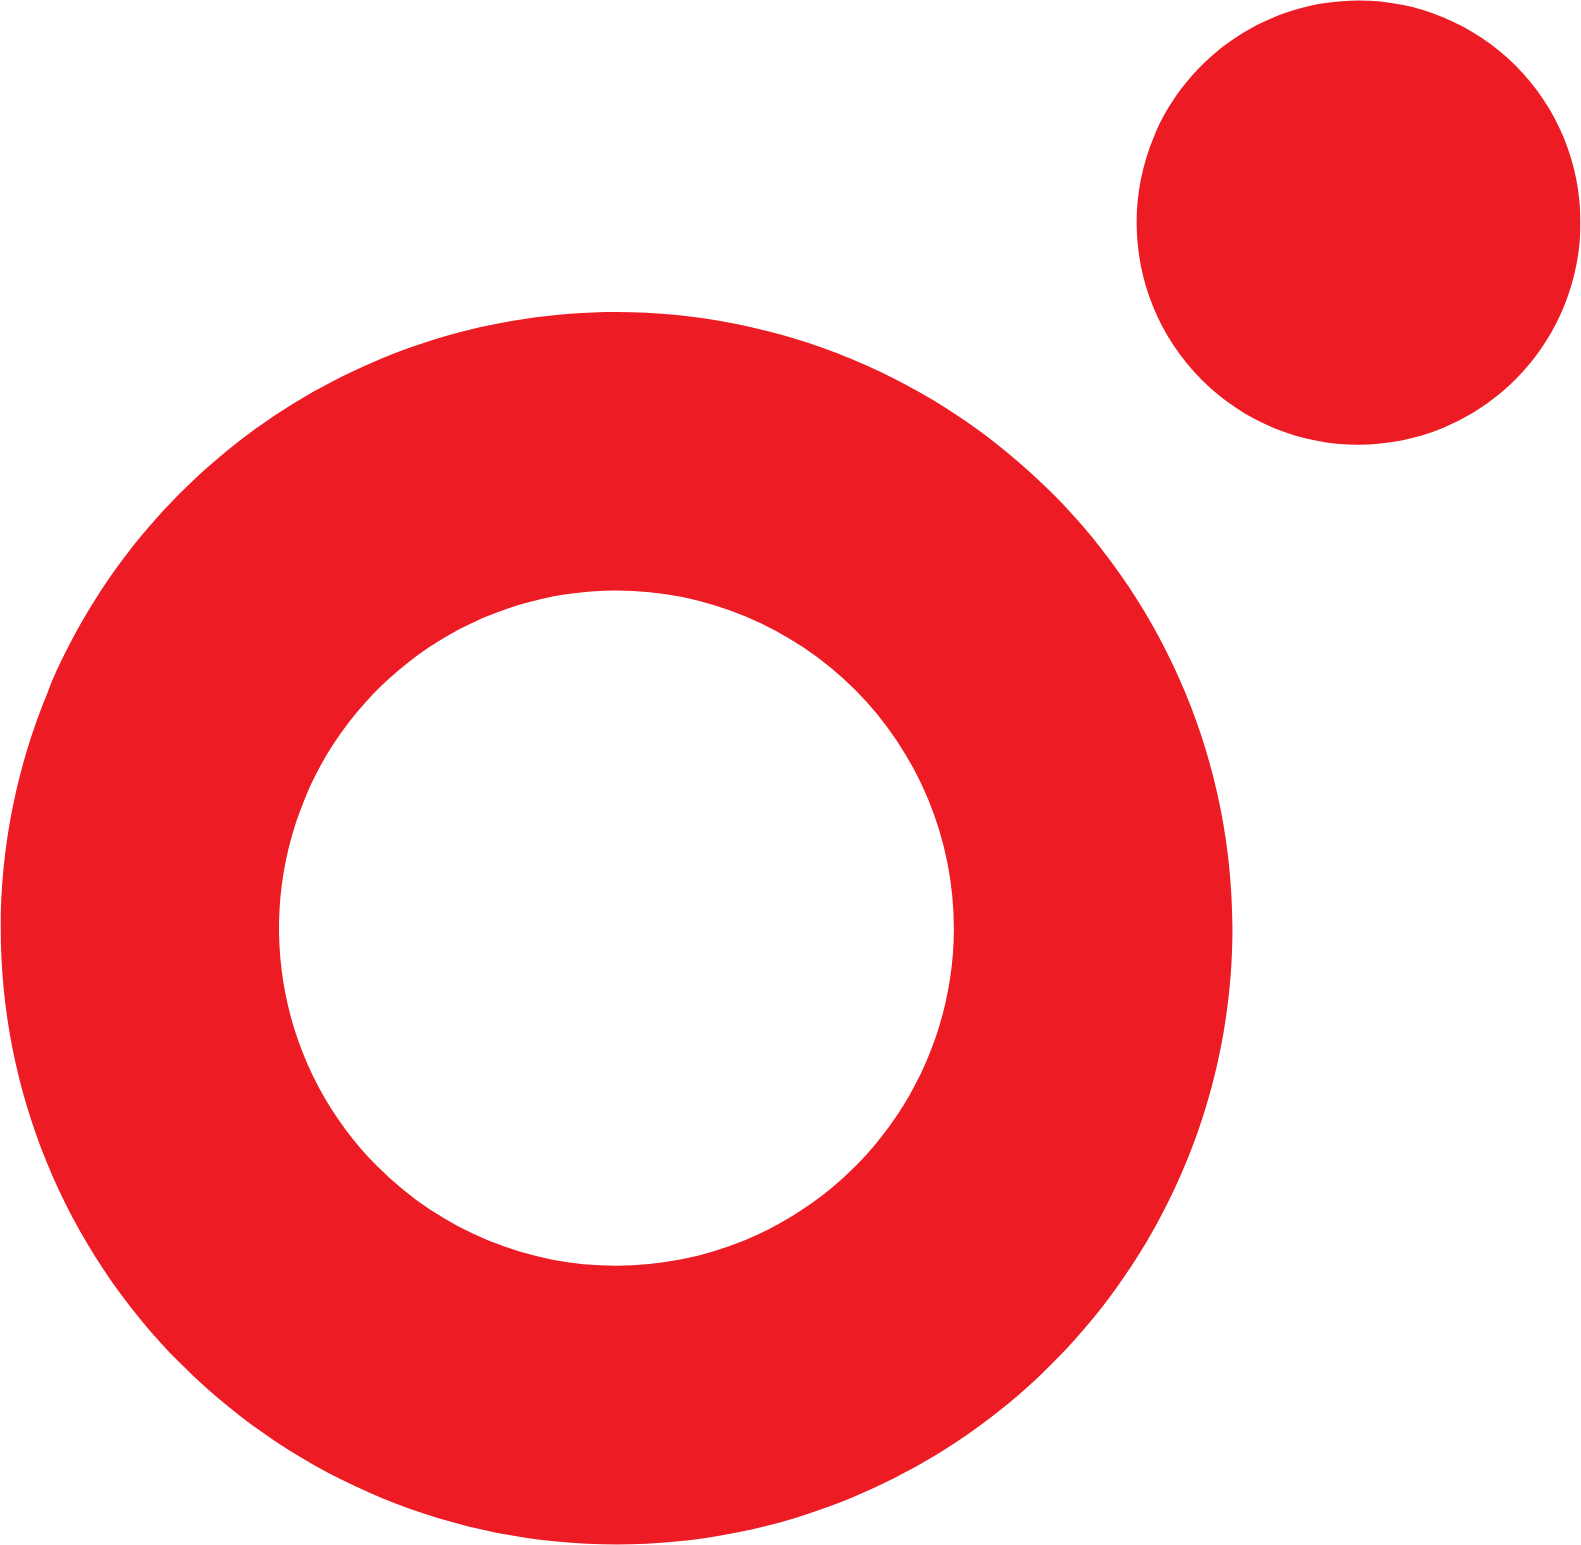 Ooredoo Partners With Snap Inc. To Create Next-Gen AR Experiences Powered  By 5G Connectivity - The Brandberries